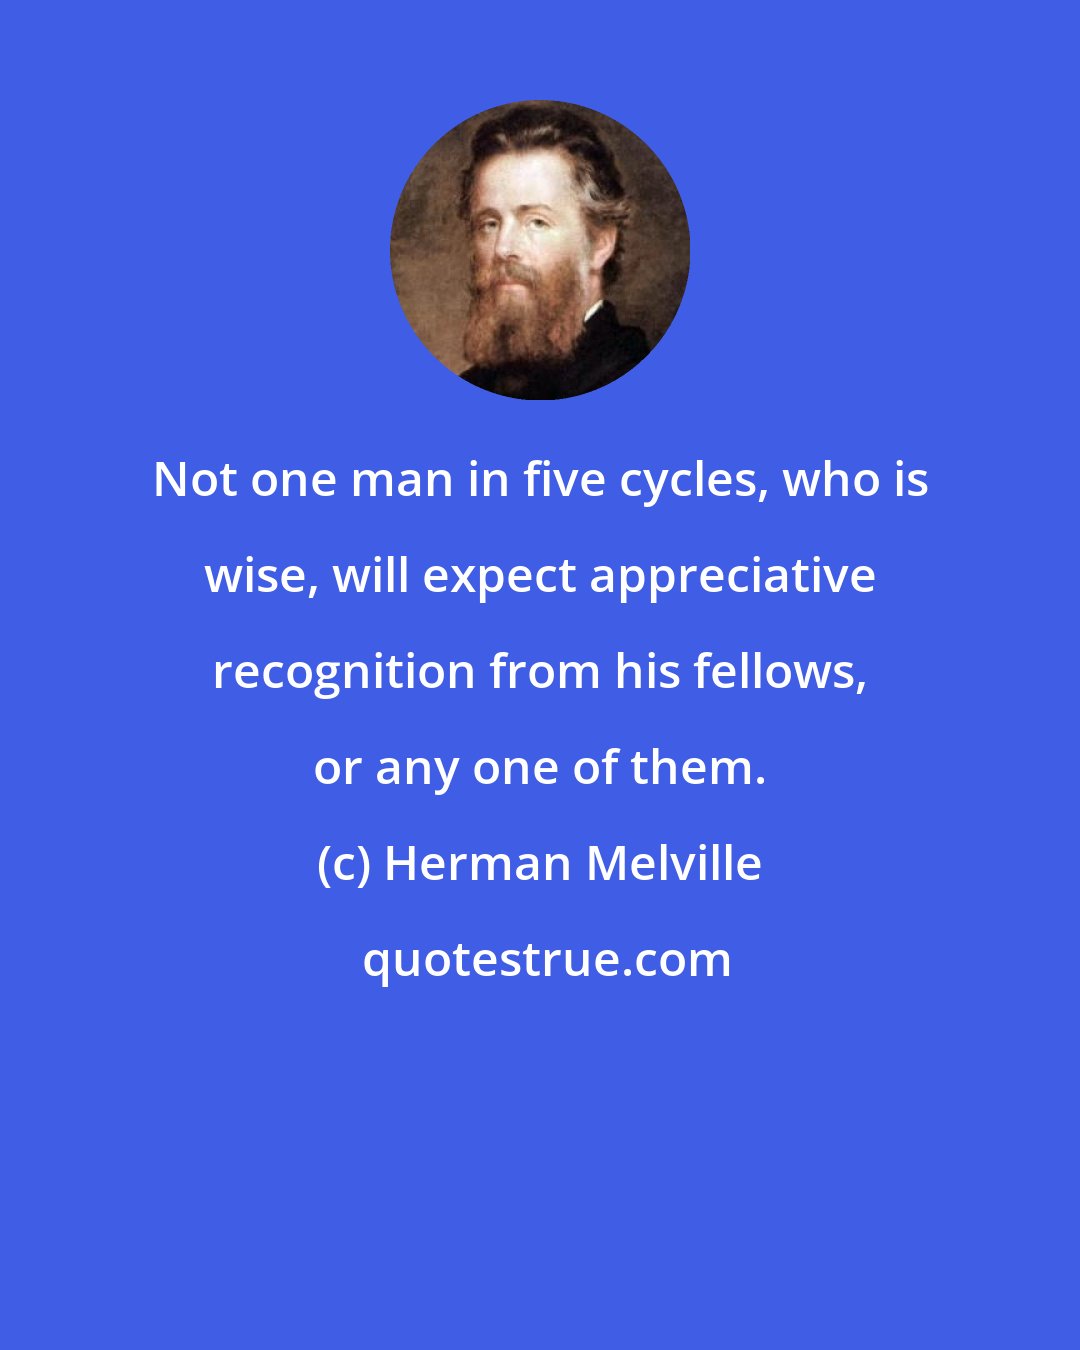 Herman Melville: Not one man in five cycles, who is wise, will expect appreciative recognition from his fellows, or any one of them.